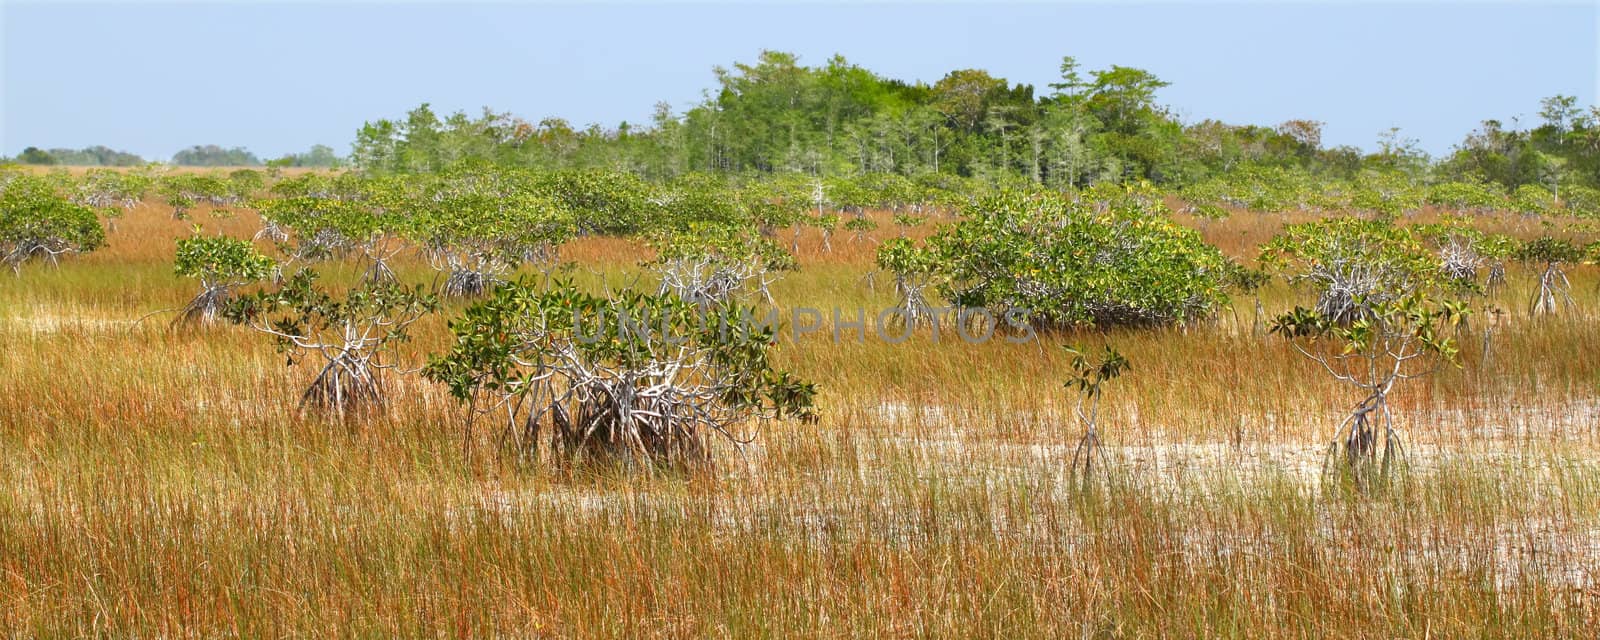 Mangroves in a parched landscape of Everglades National Park in the dry season.